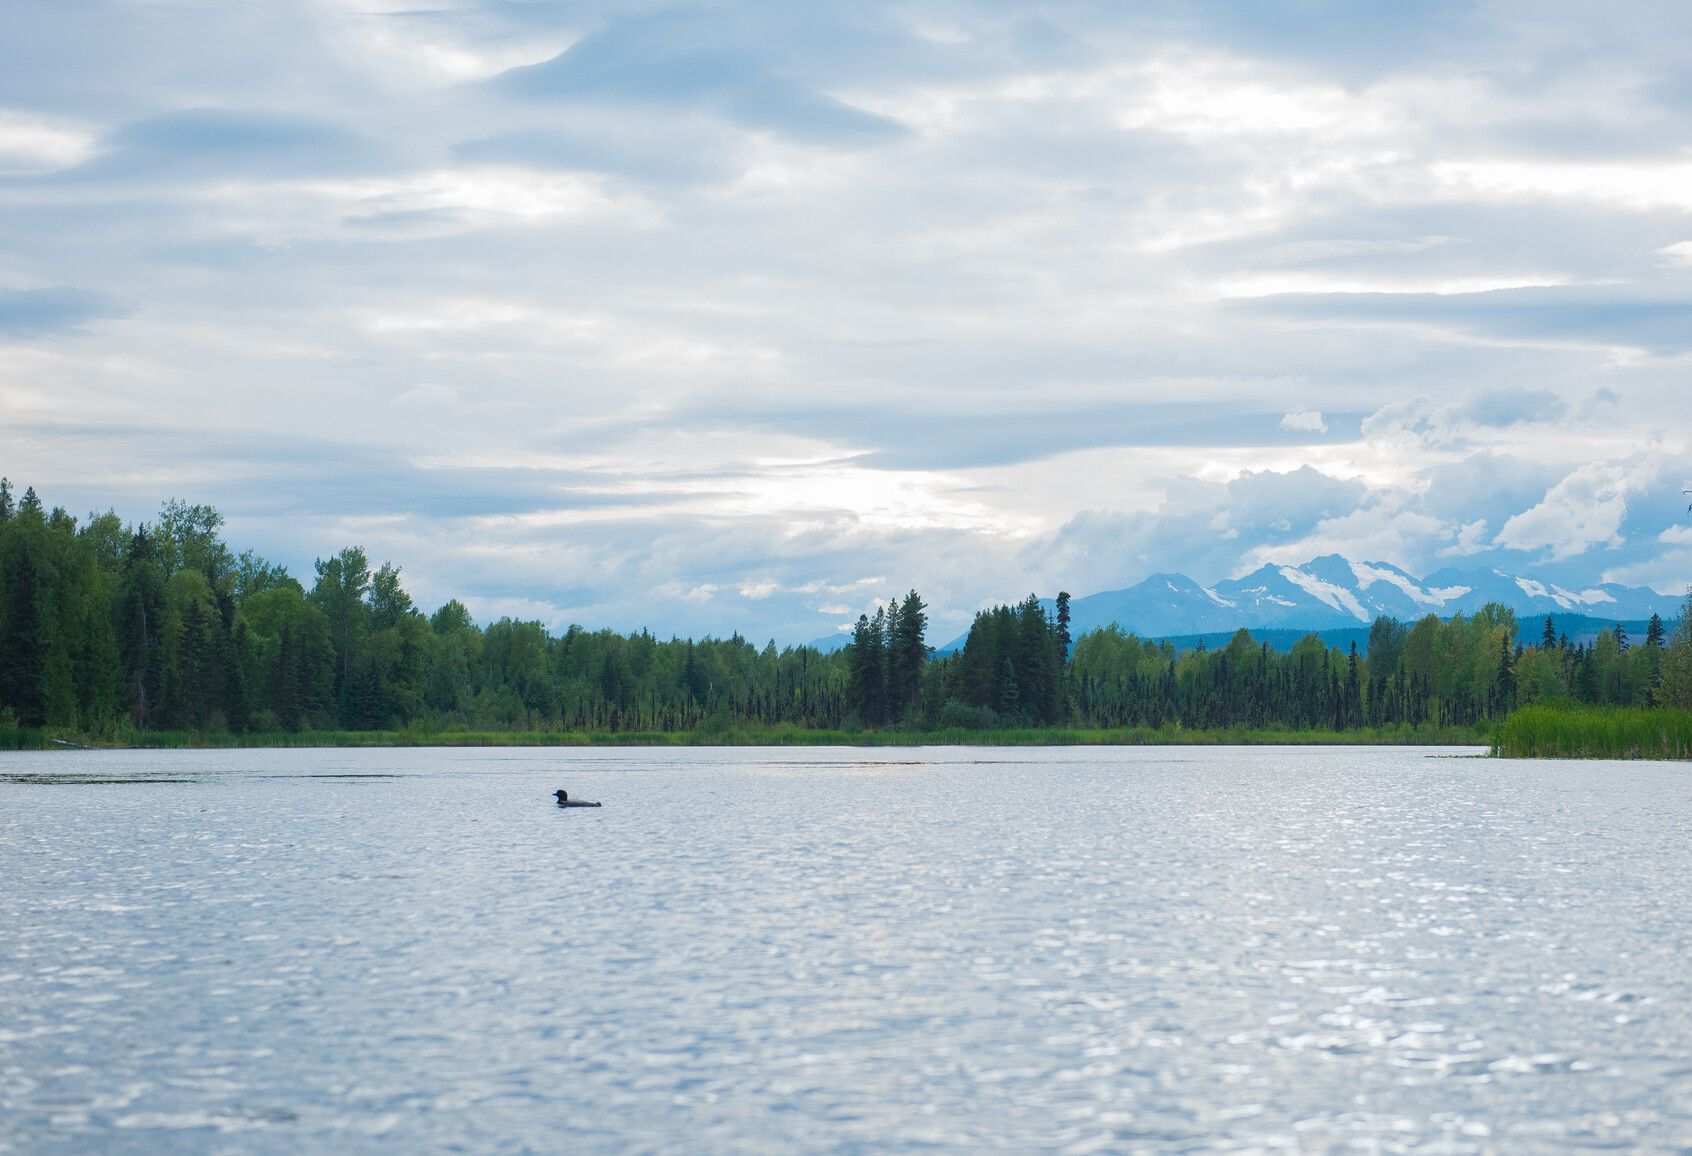 In Seeley Lake Park, a loon floats on the lake with the mountains and glaciers in the background.